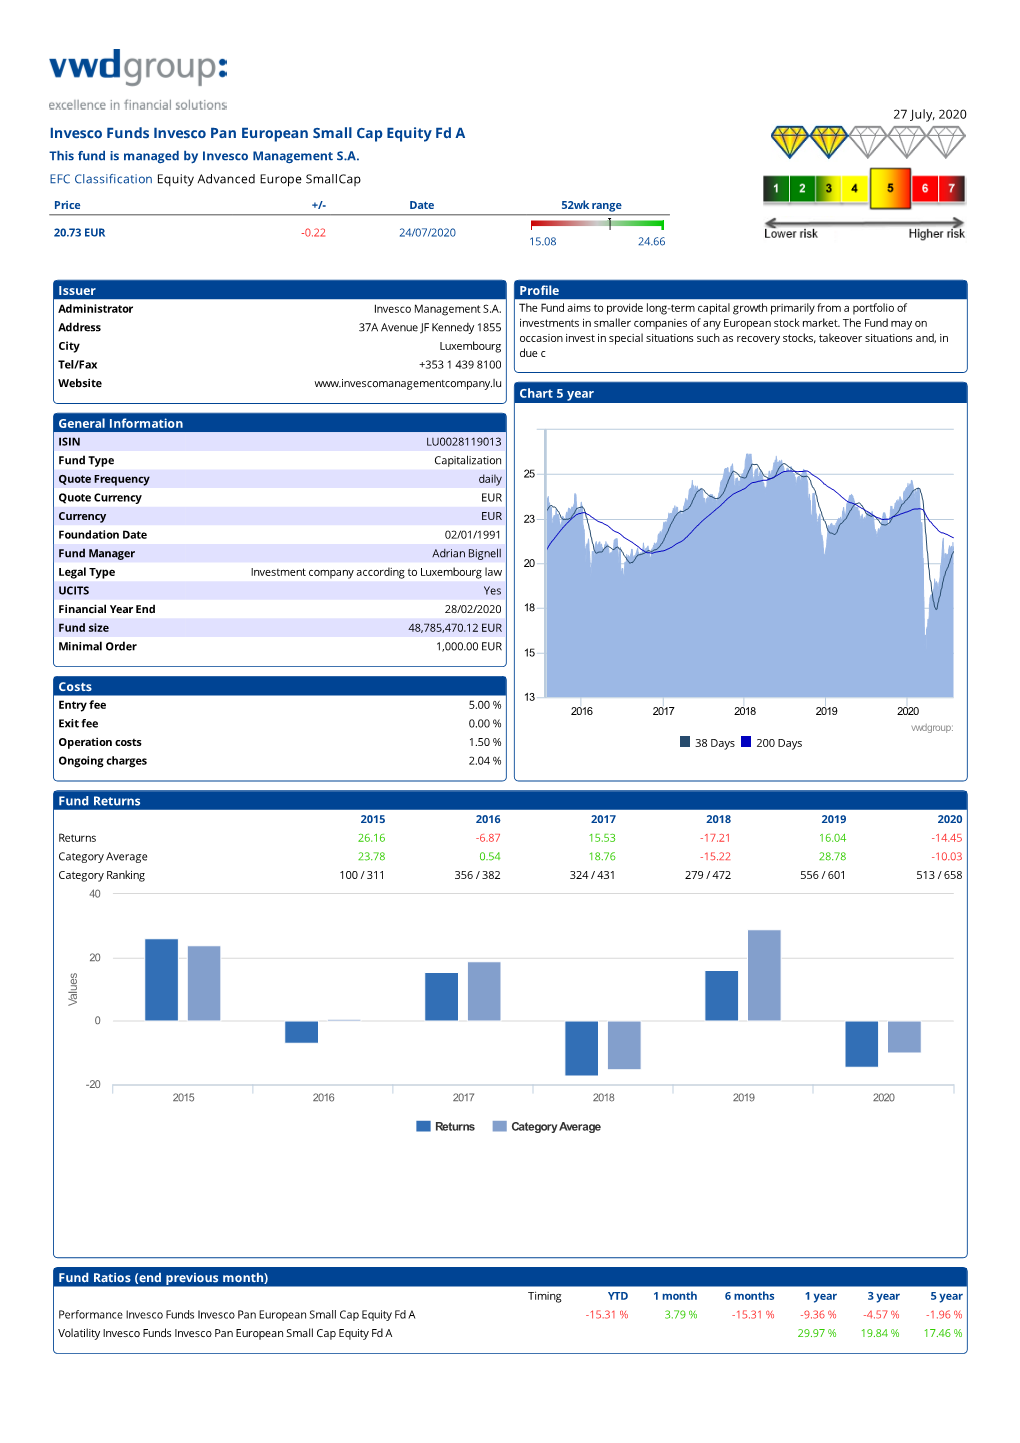 Invesco Funds Invesco Pan European Small Cap Equity Fd a This Fund Is Managed by Invesco Management S.A